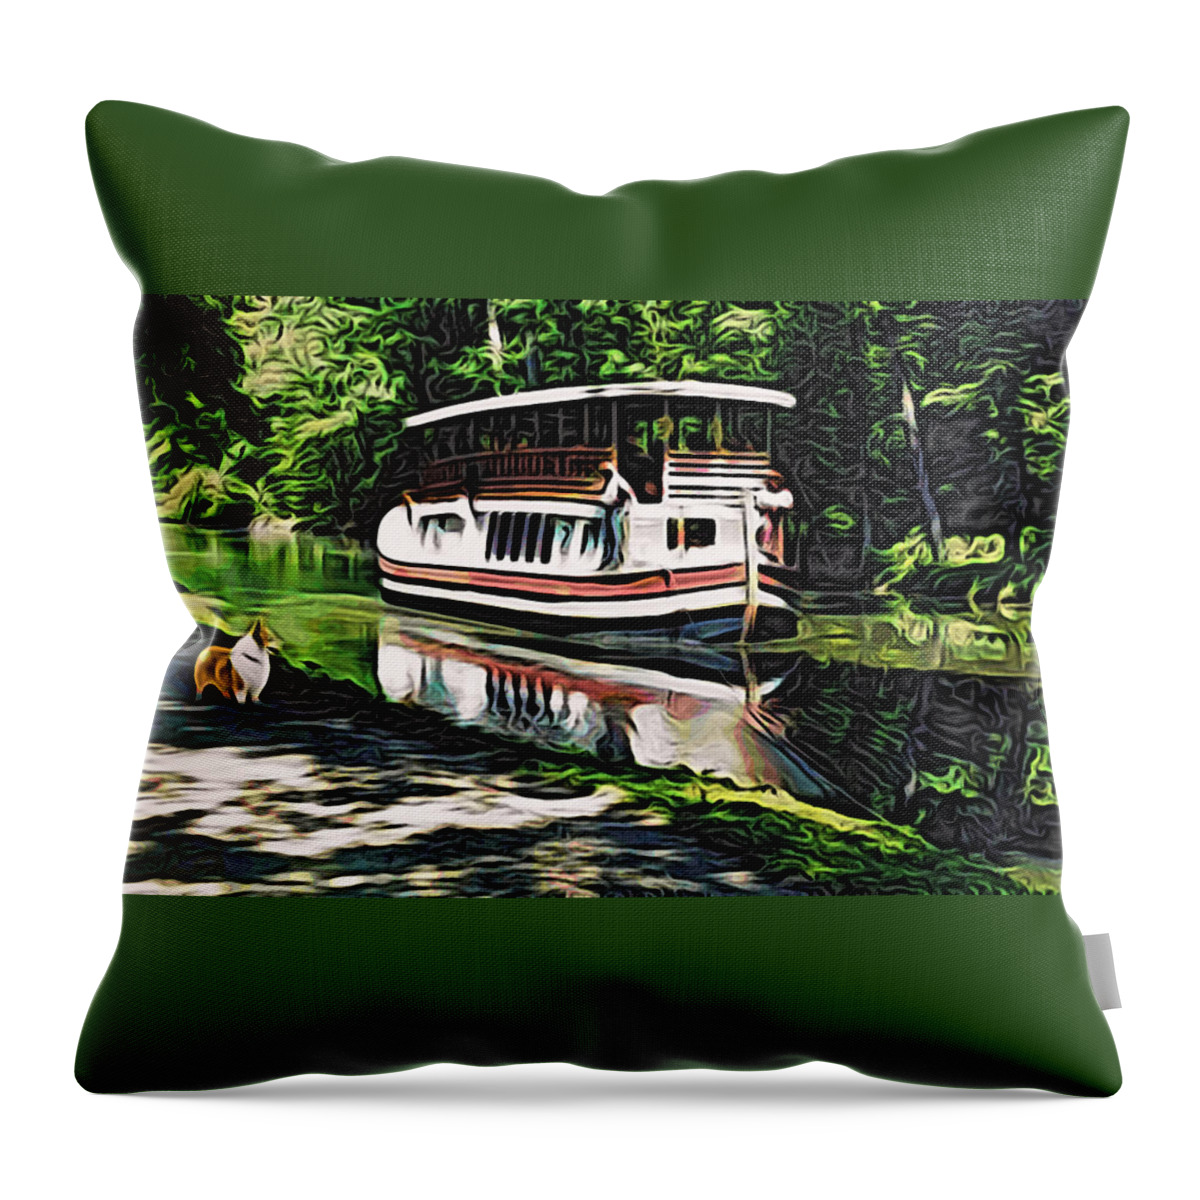 Pembroke Welsh Corgi Throw Pillow featuring the digital art River Boat with Welsh Corgi by Kathy Kelly